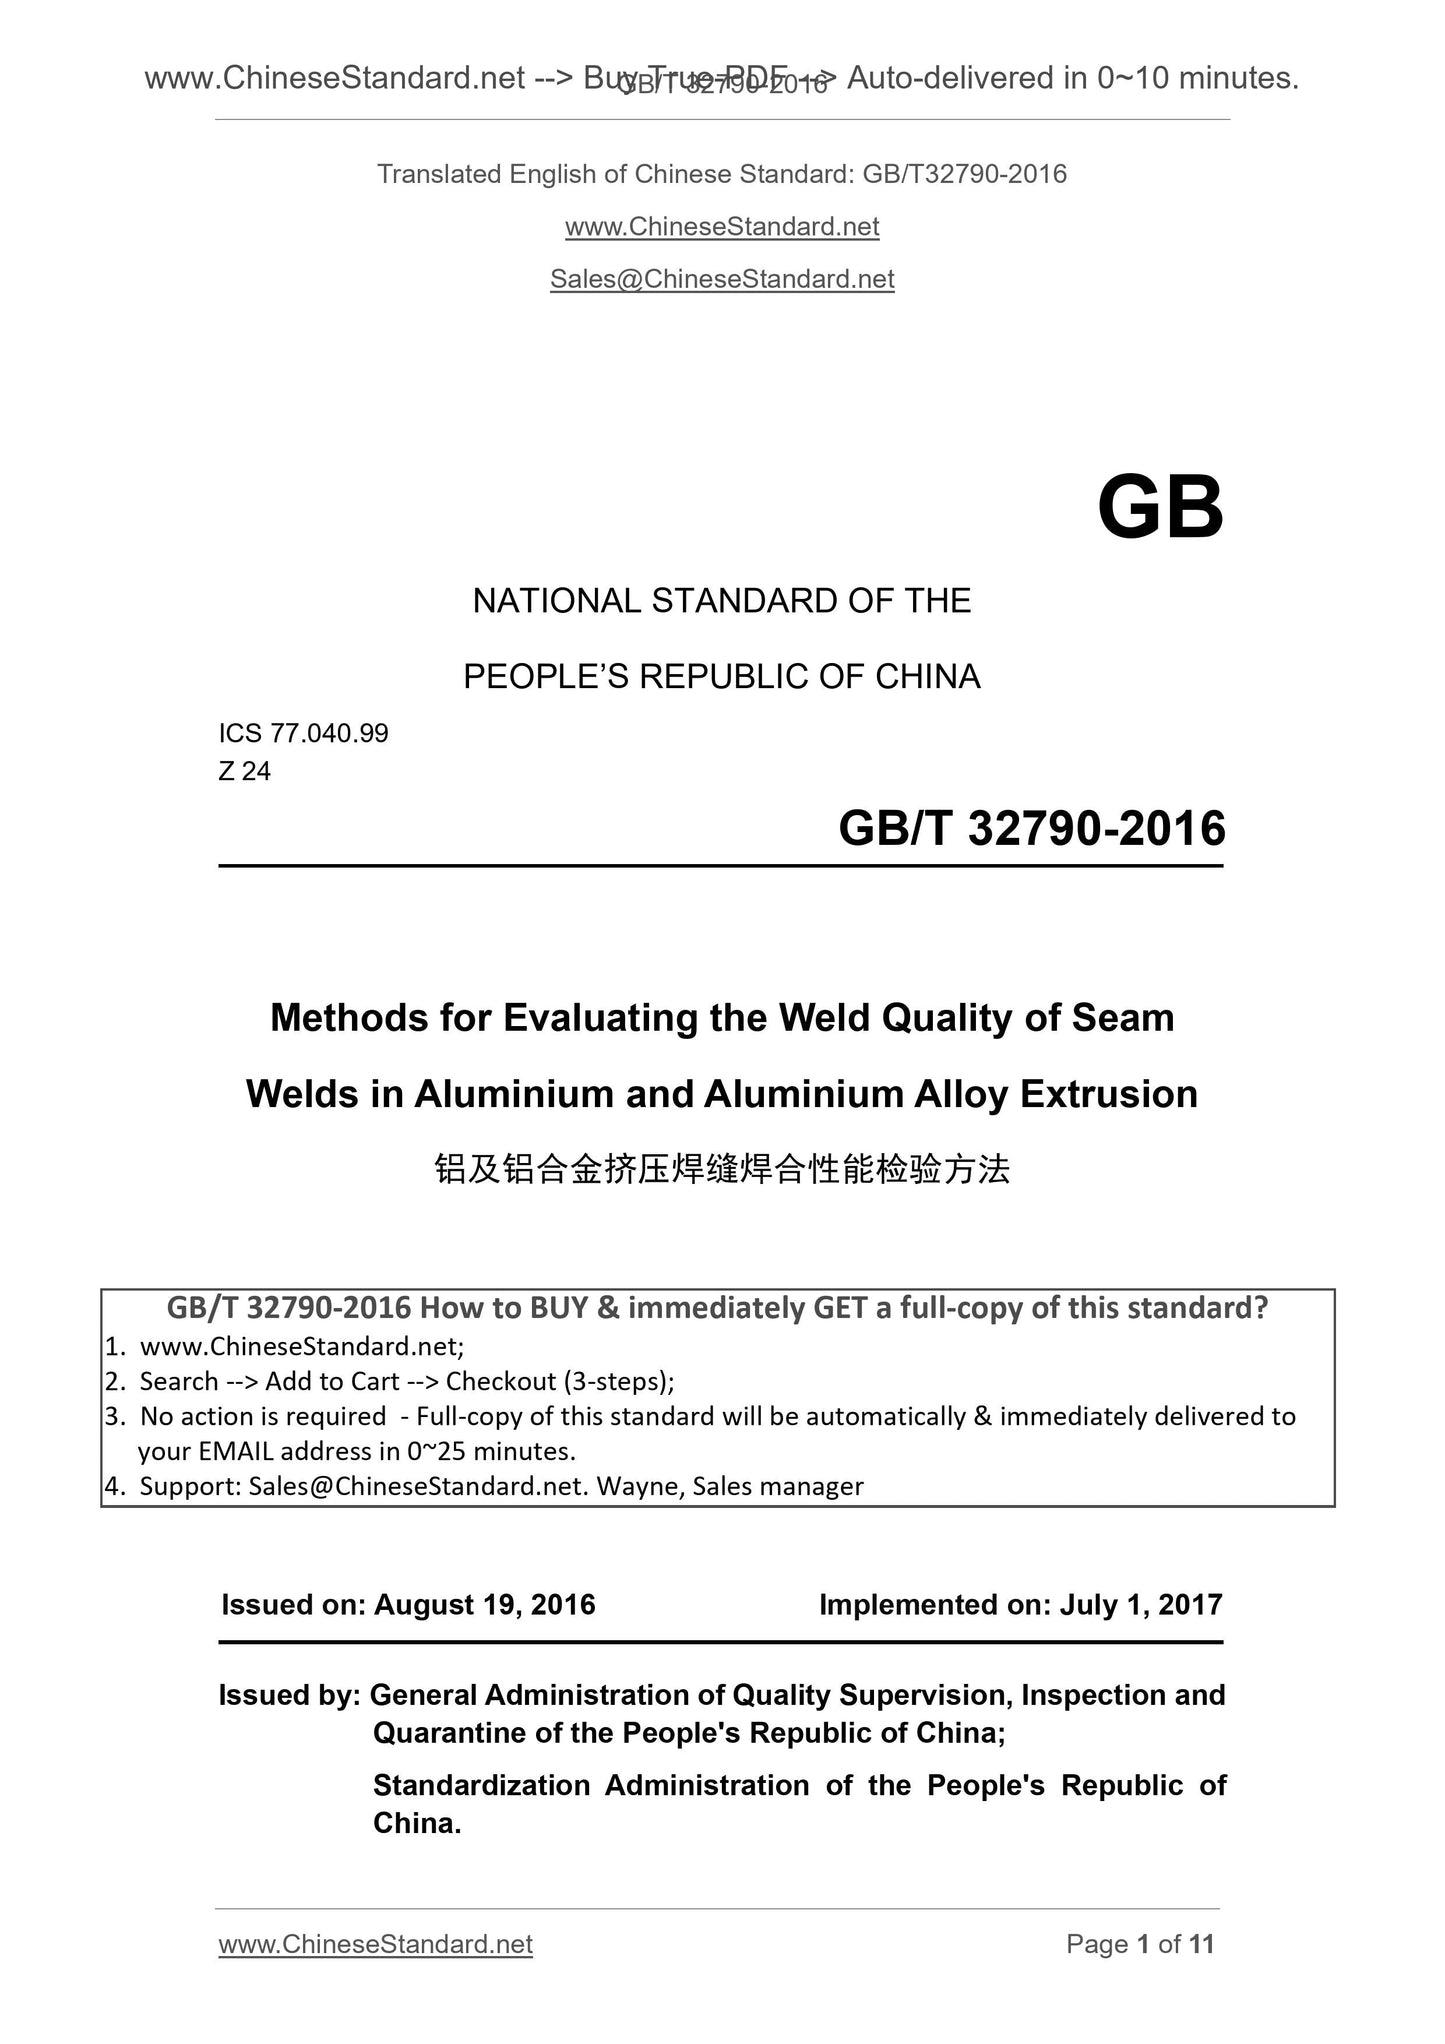 GB/T 32790-2016 Page 1